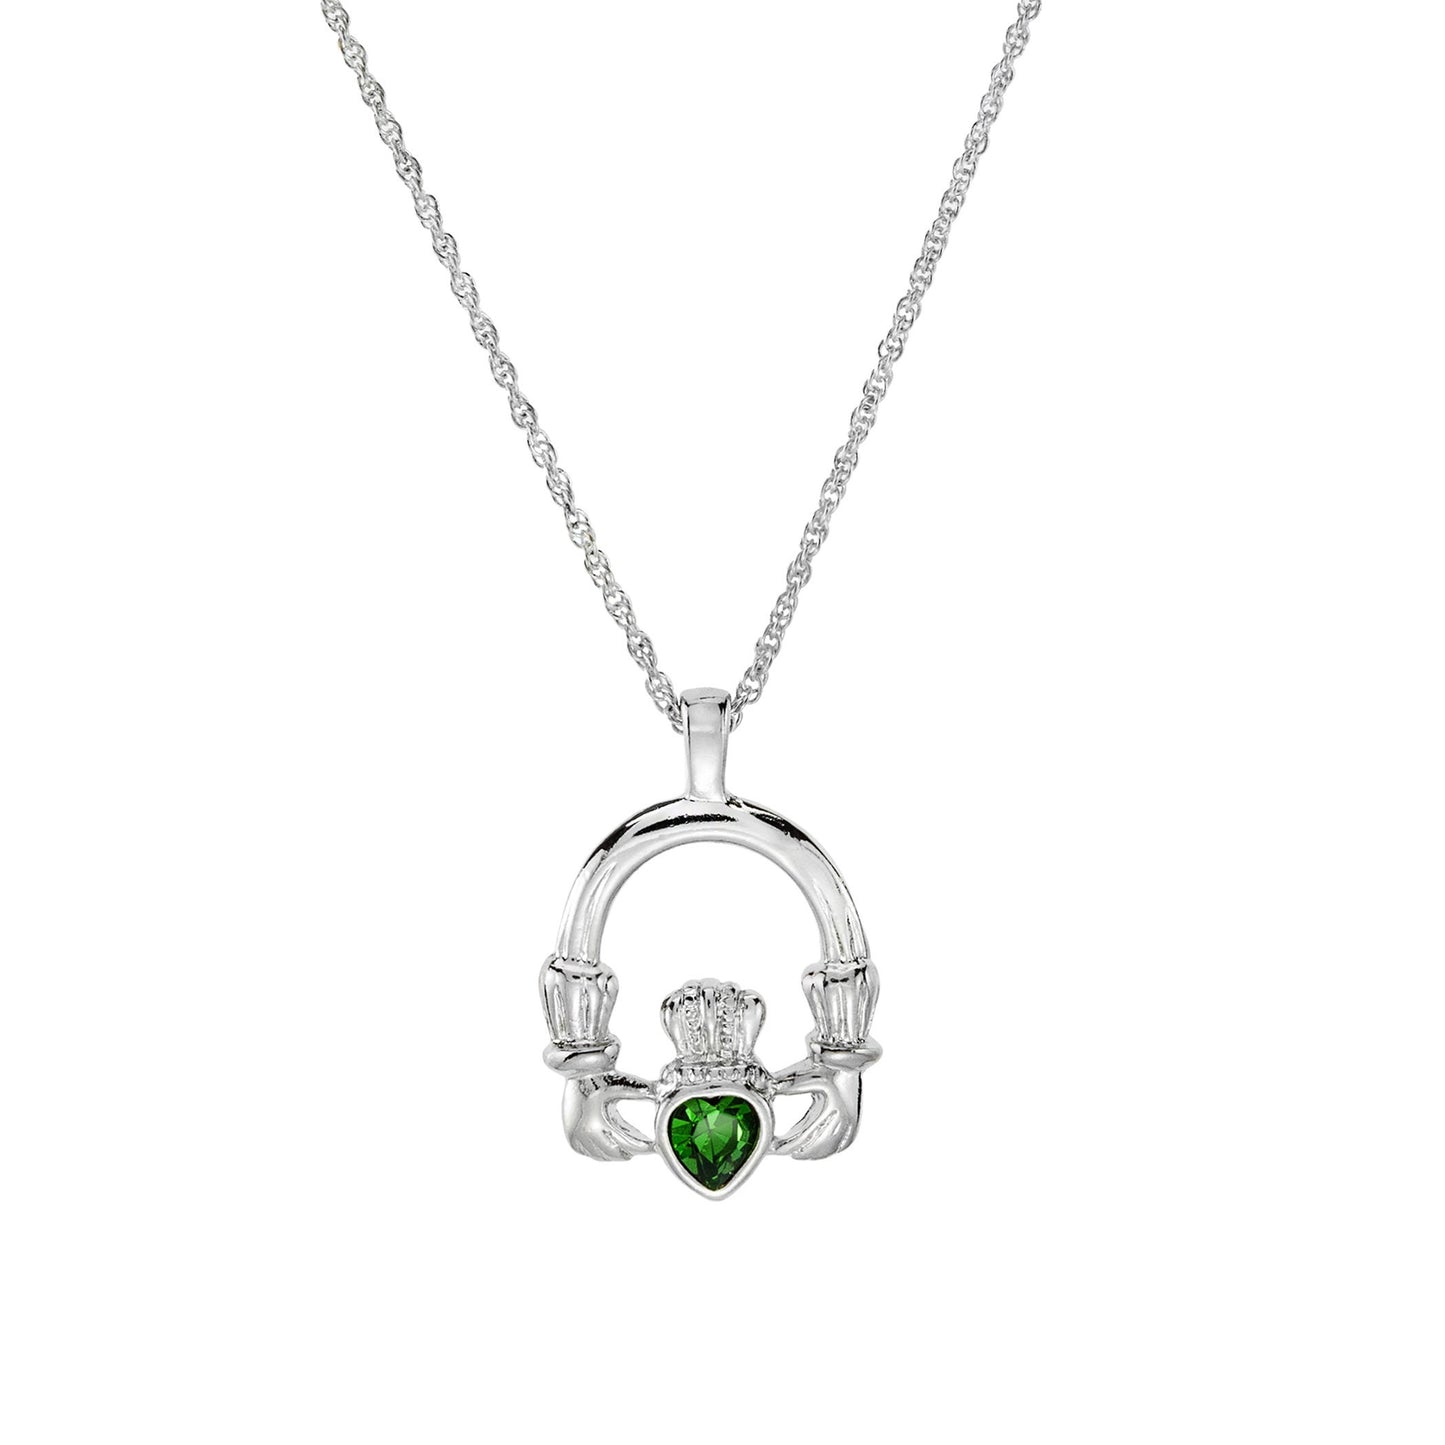 Vintage Claddagh Necklace Green Tourmaline Swarovski Heart Crystal 18k White Gold Silver Made in the USA N3099